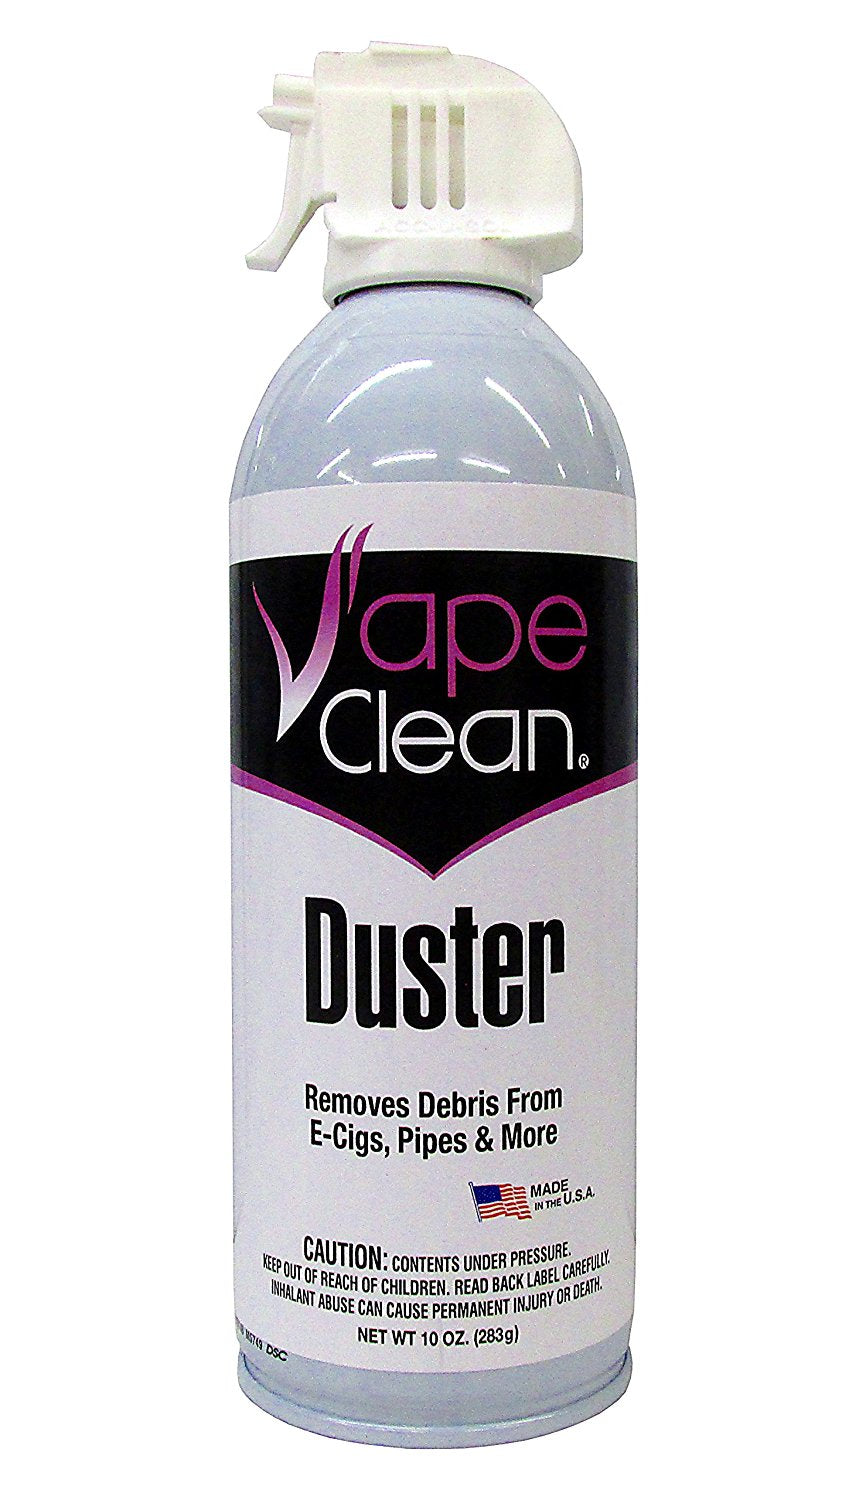 Wholesale air conditioning duster for Cleaner, Better Homes